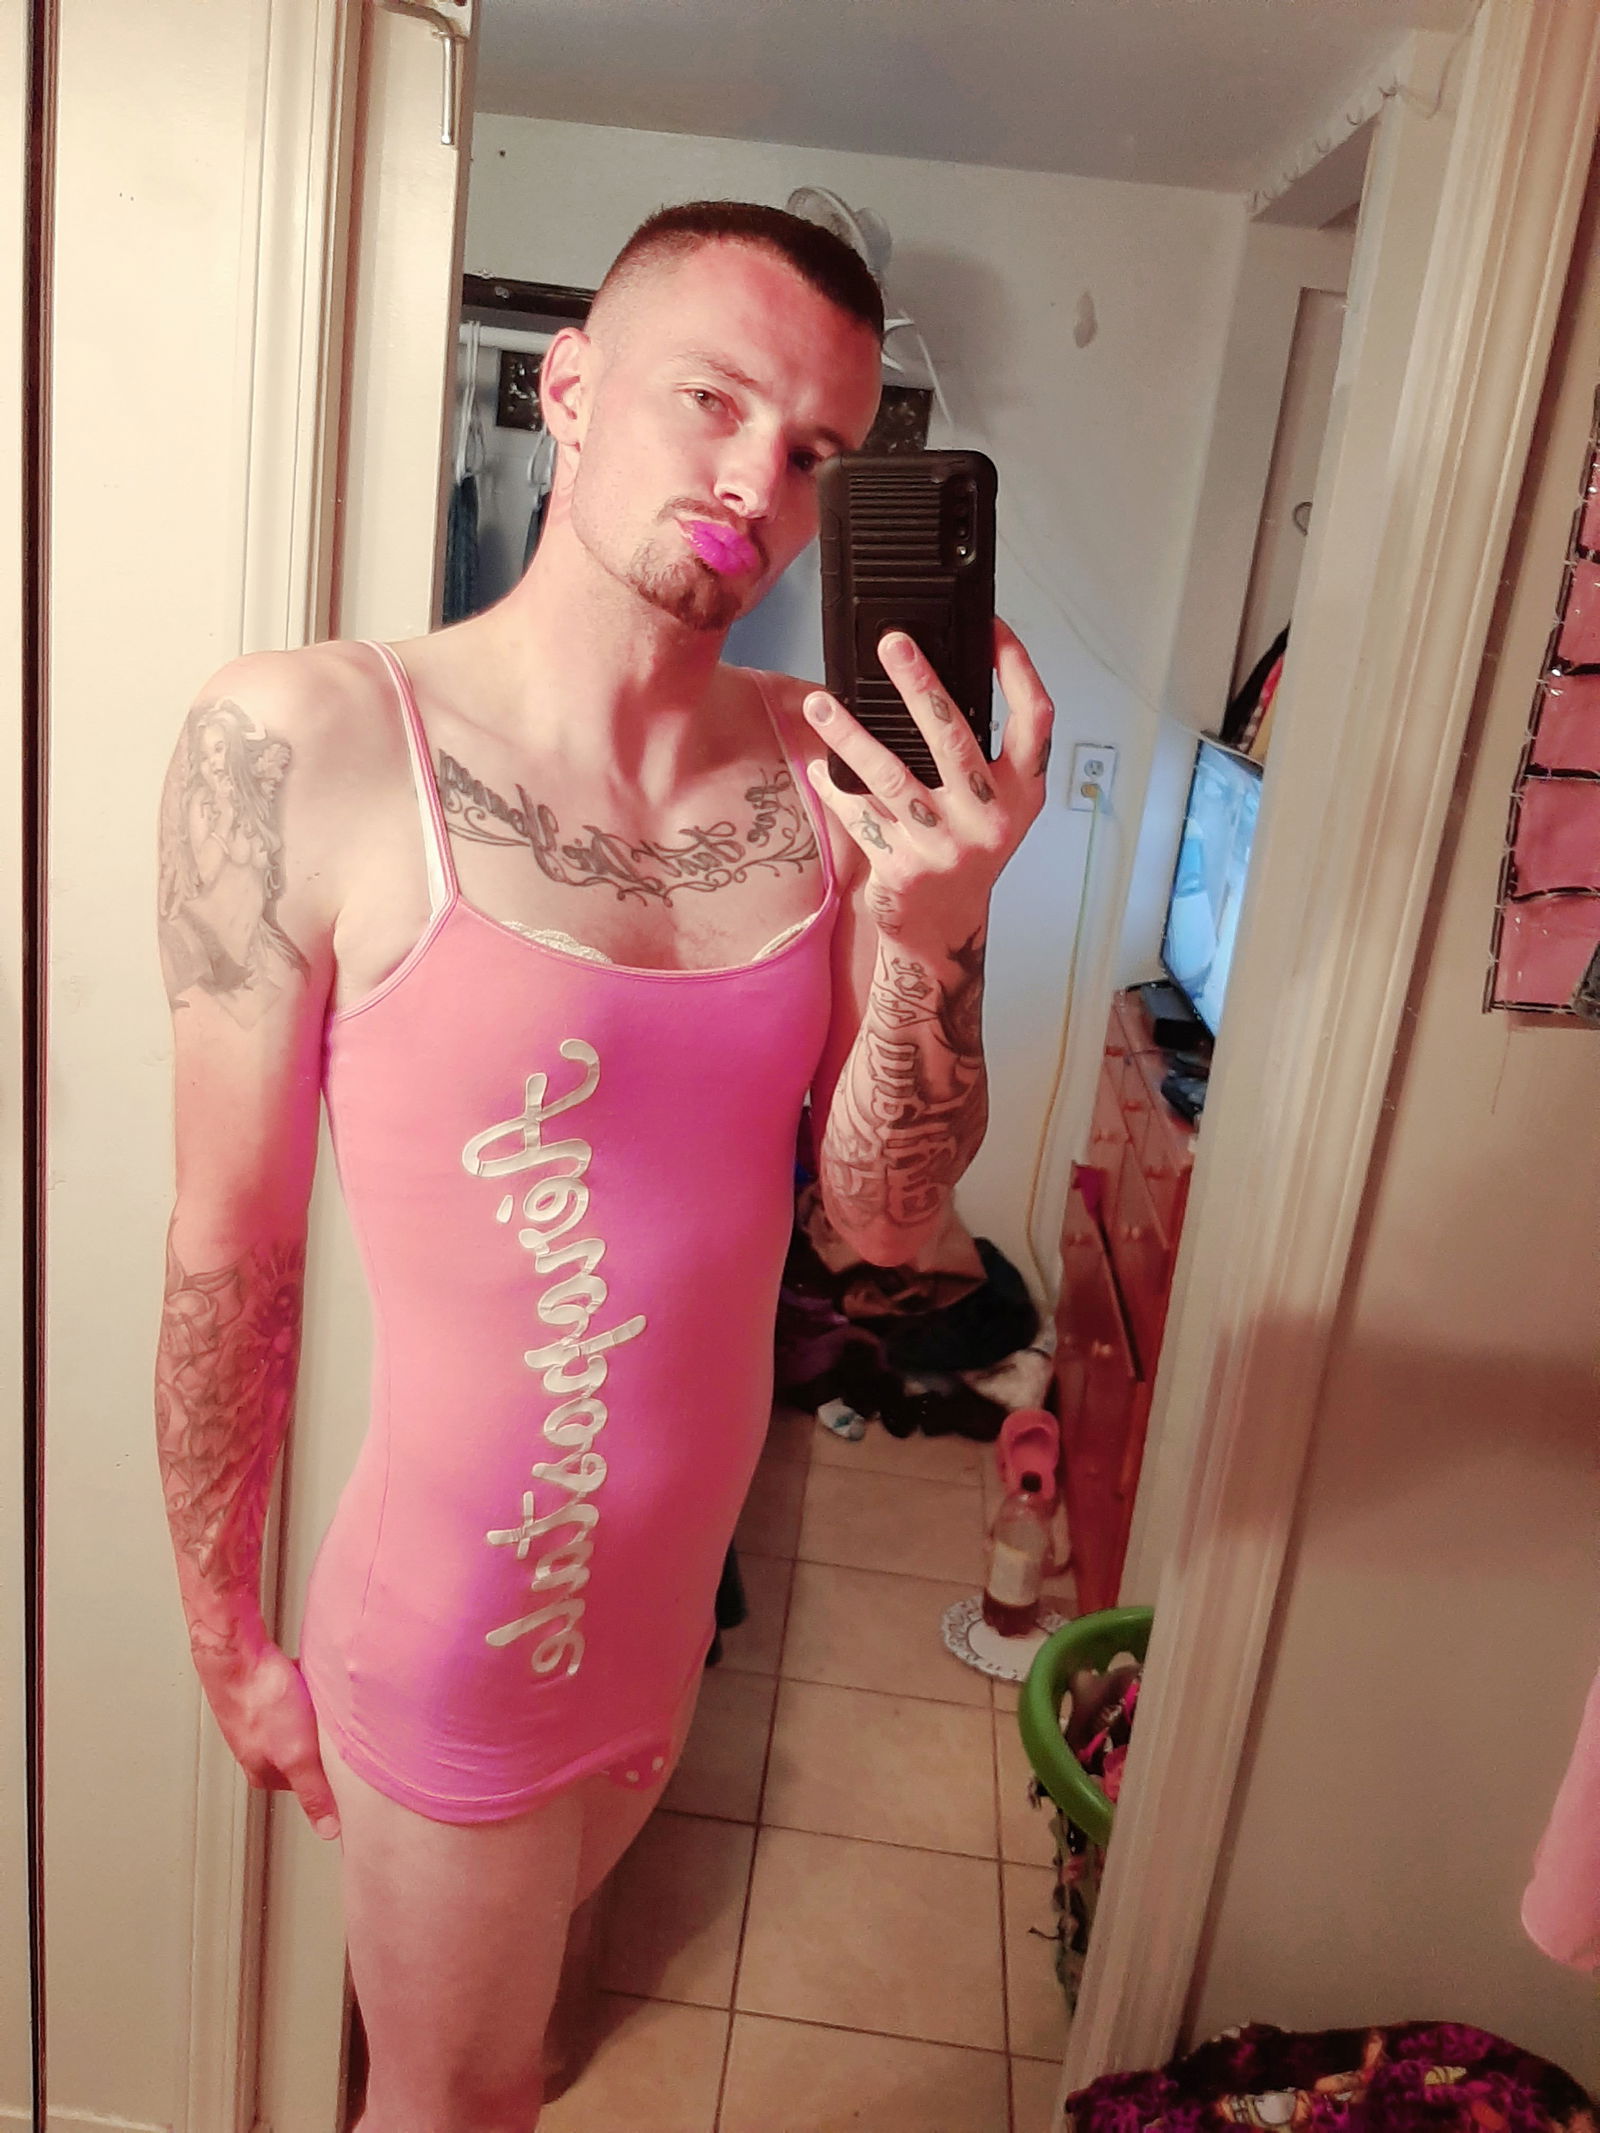 Photo by pinksissycuck with the username @pinksissycuck,  September 25, 2019 at 8:24 AM. The post is about the topic Sissy humiliation